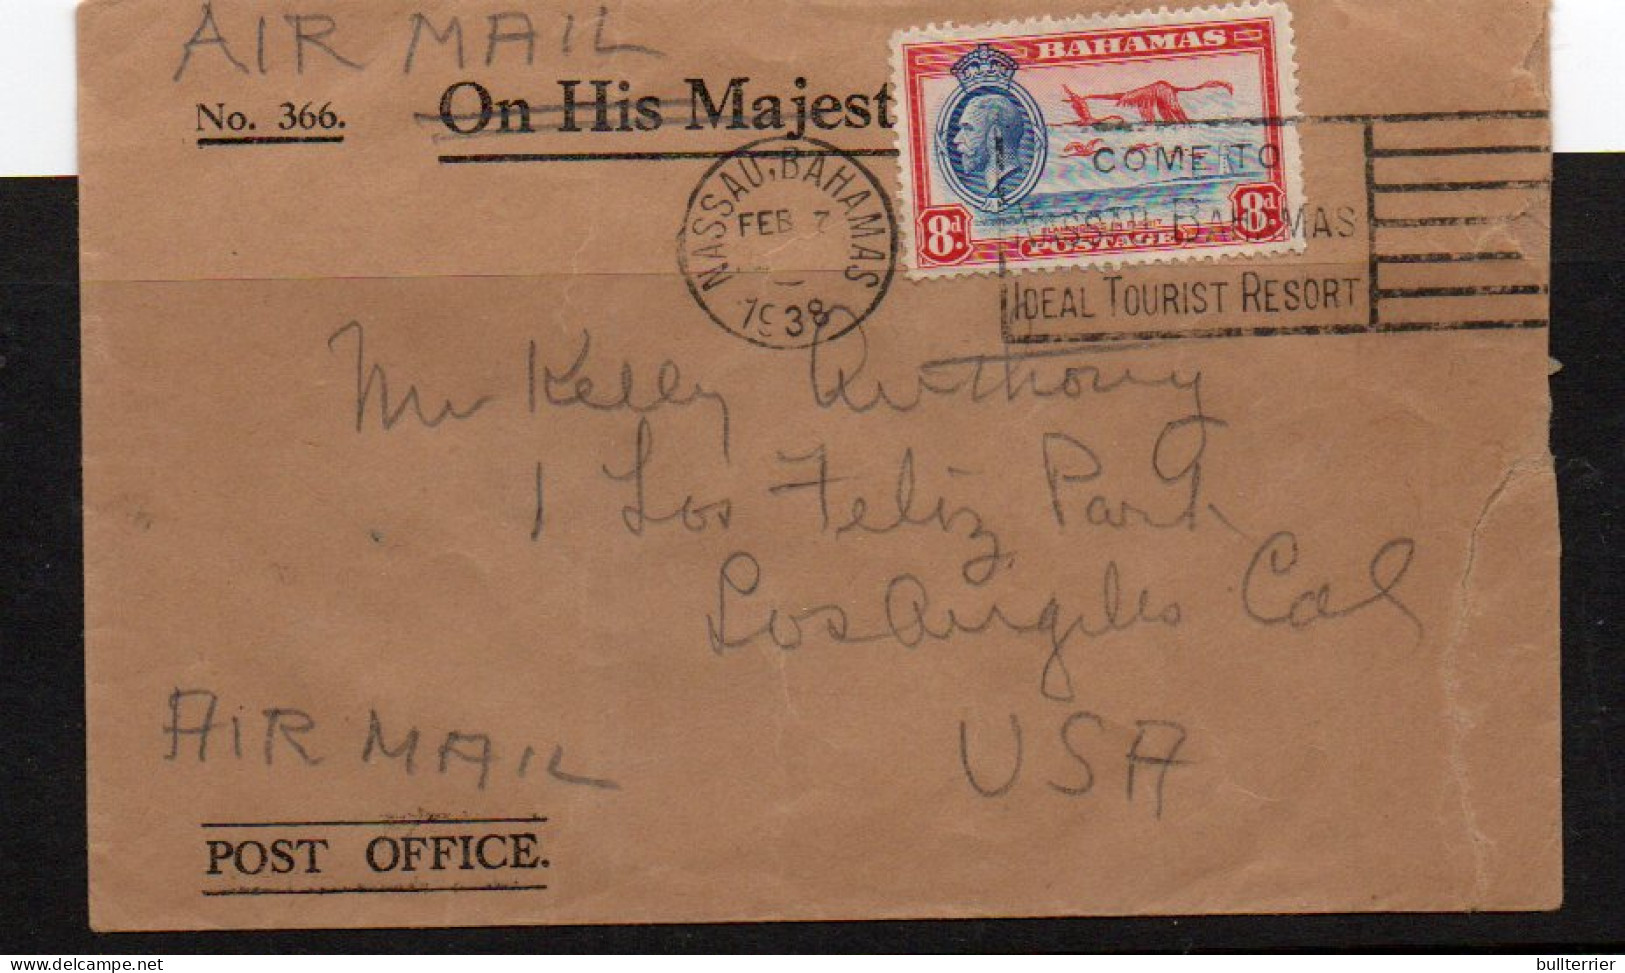 BAHAMAS - 1938 - AIRMAIL COVER TO LOS ANGLES FRANKED 8D FLAMINGO  - 1859-1963 Crown Colony